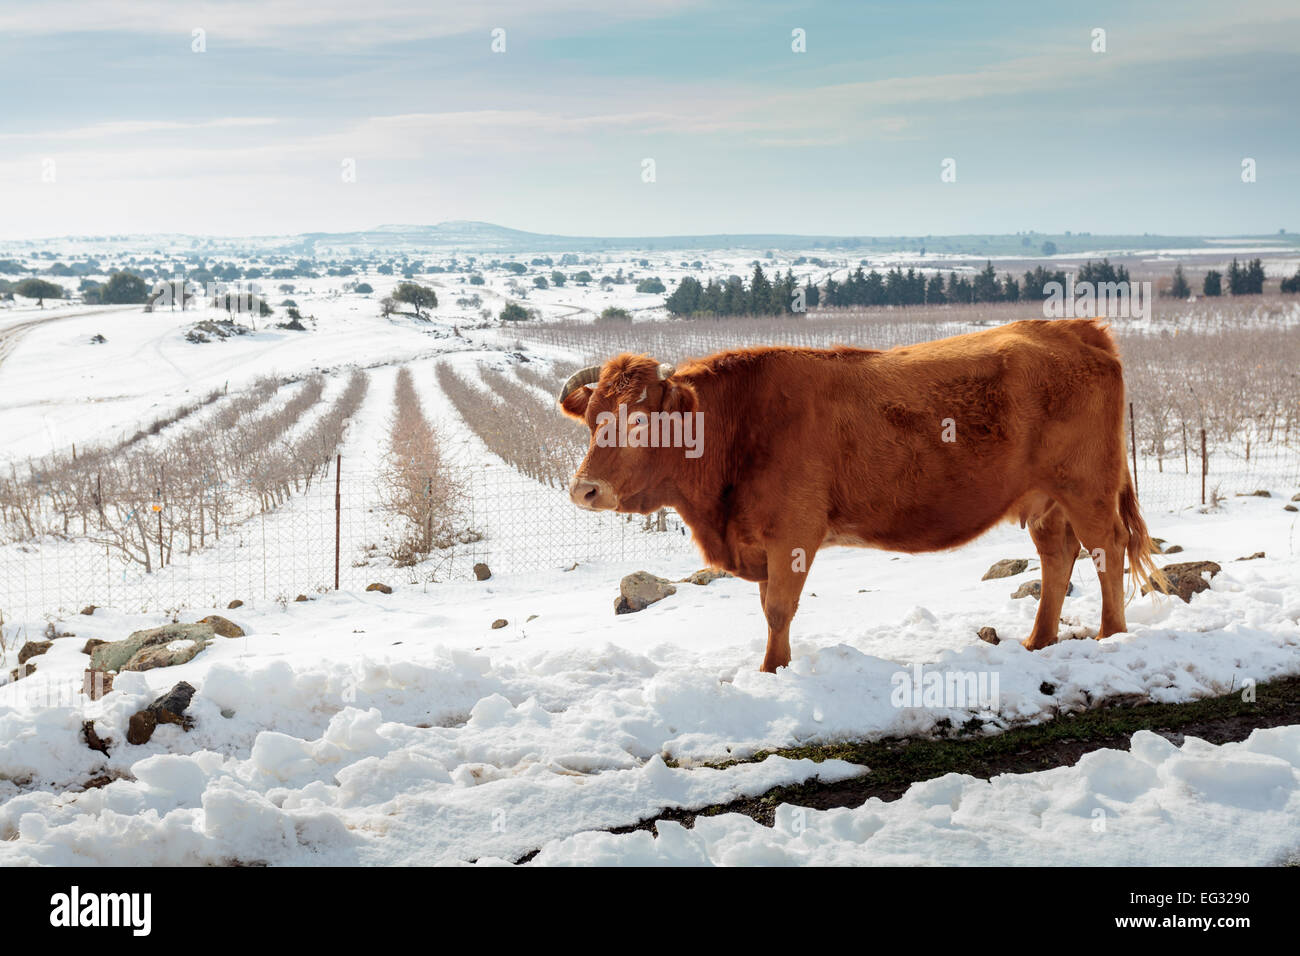 Cows in Snowscape. Photographed in the Golan Heights, Israel Stock Photo